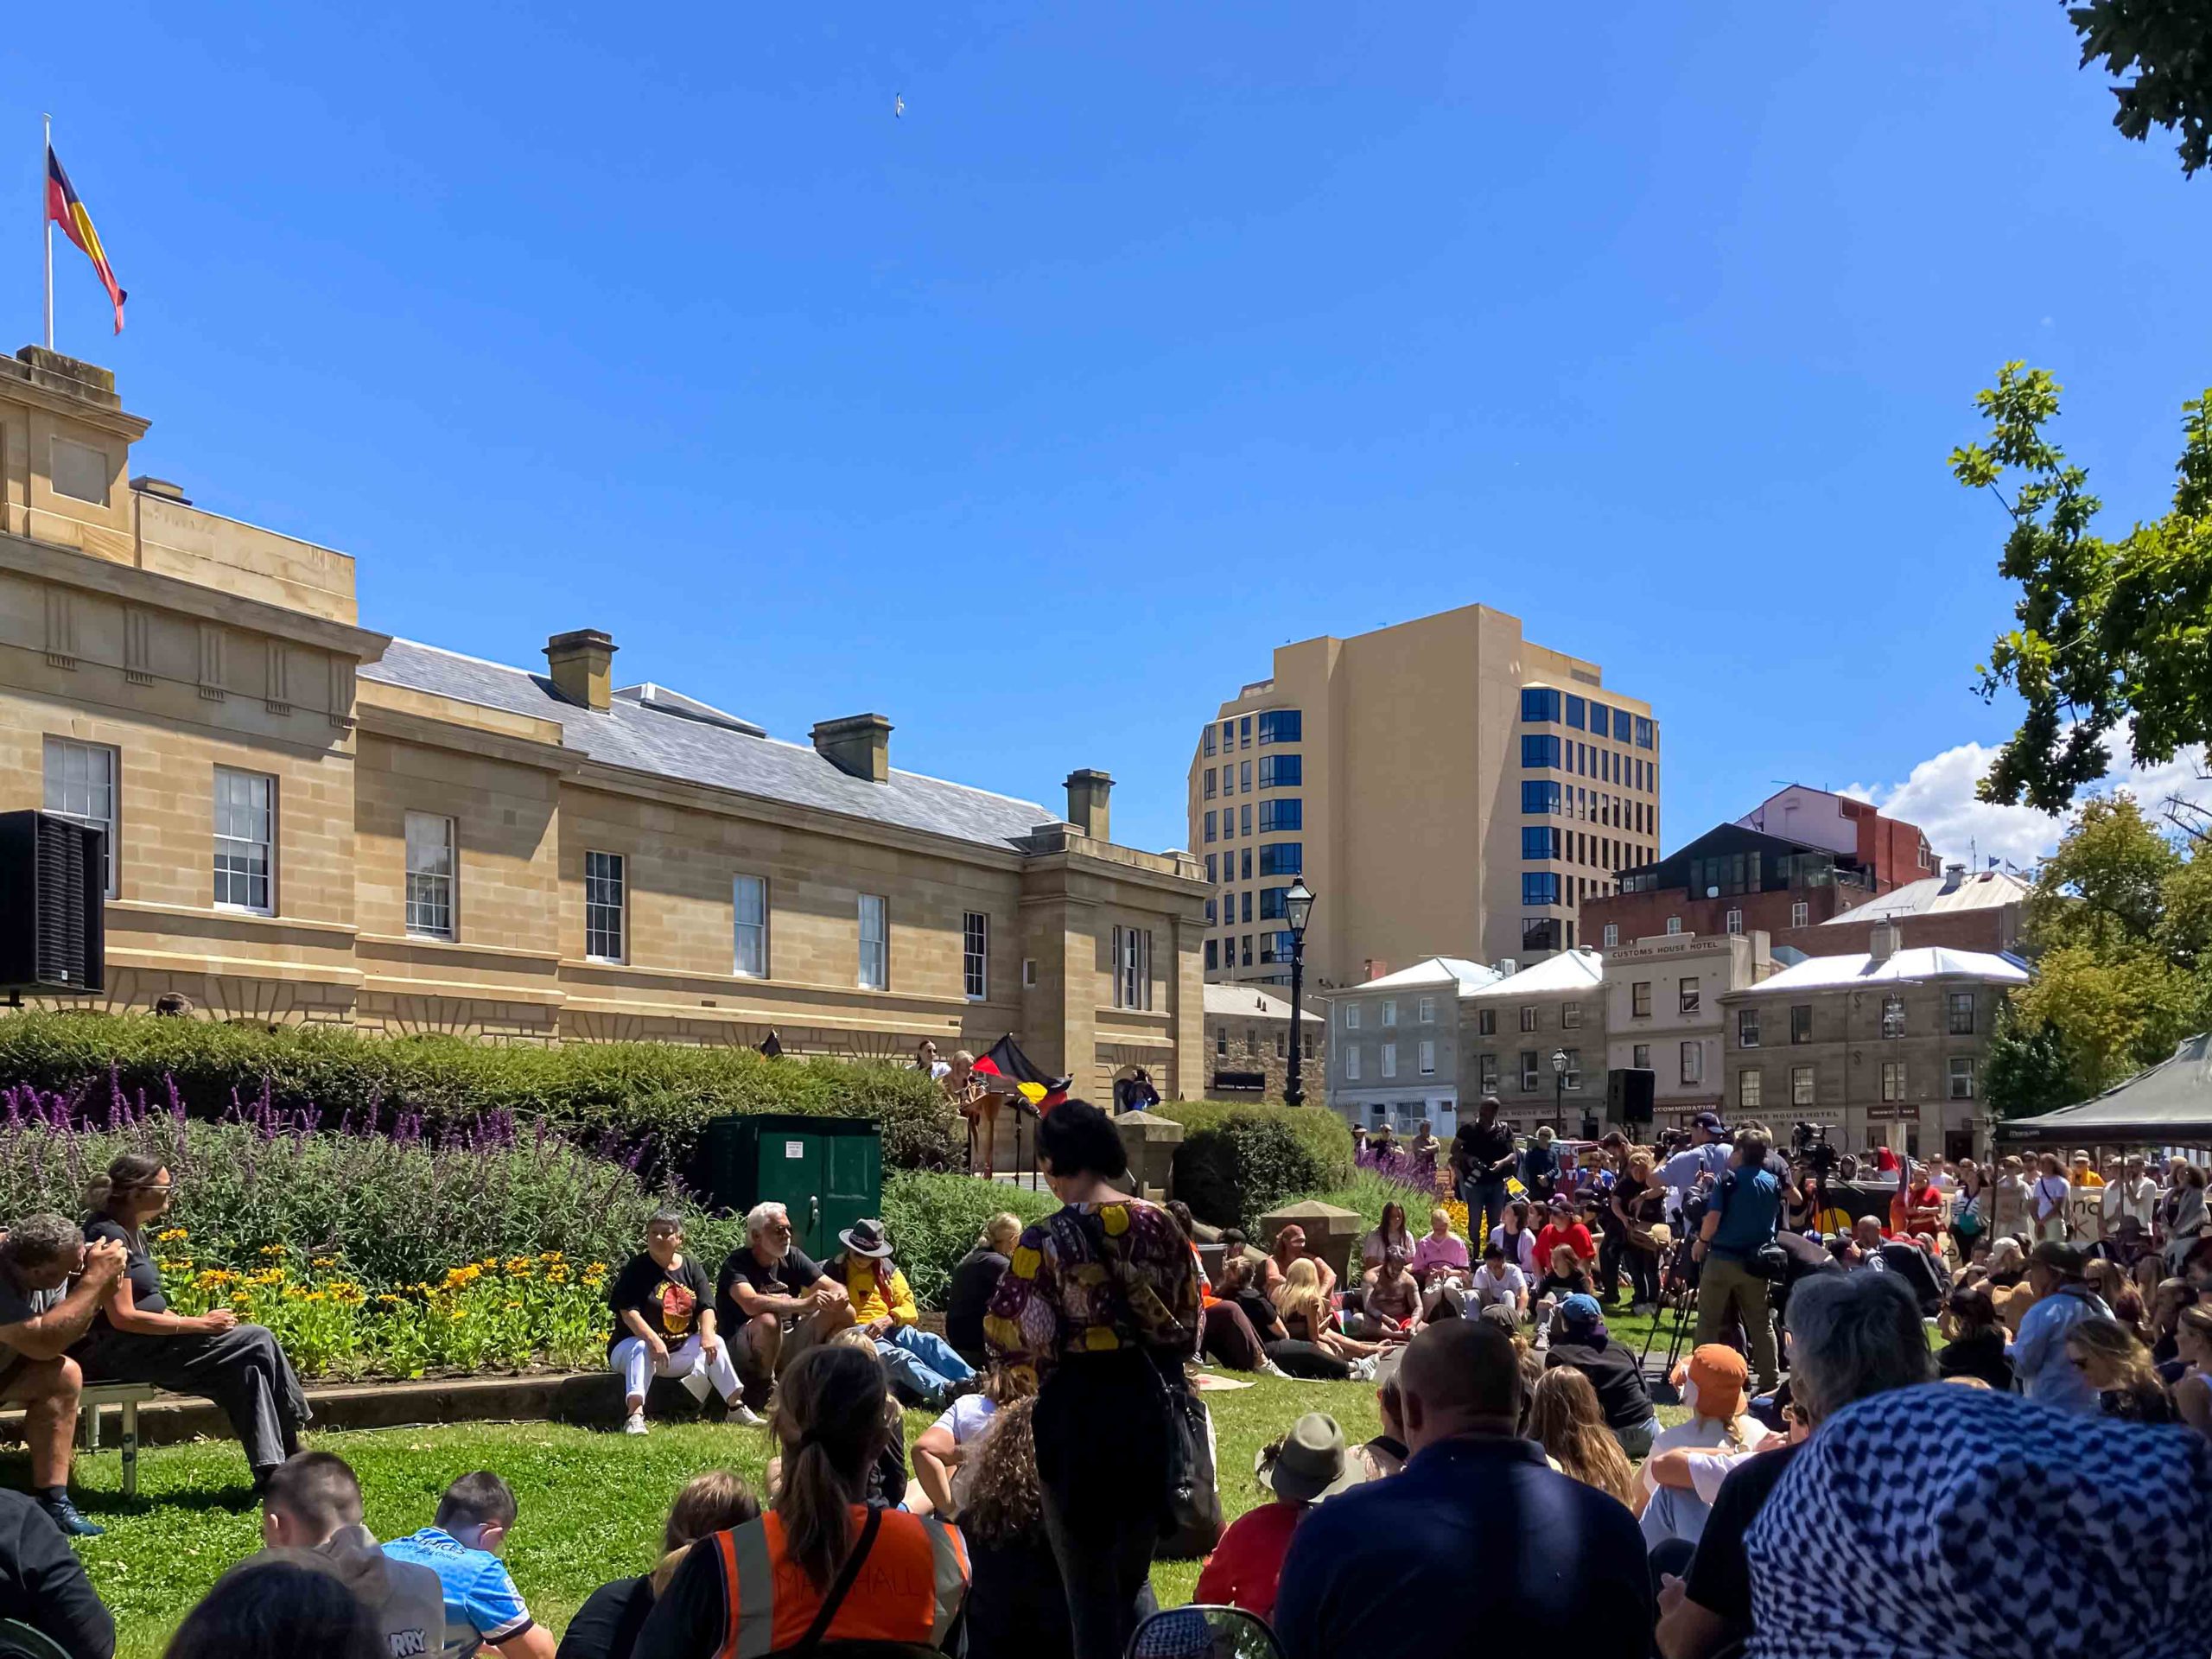 A gathering of people on the lawns outside a large sandstone building. The Aboriginal flag is flying